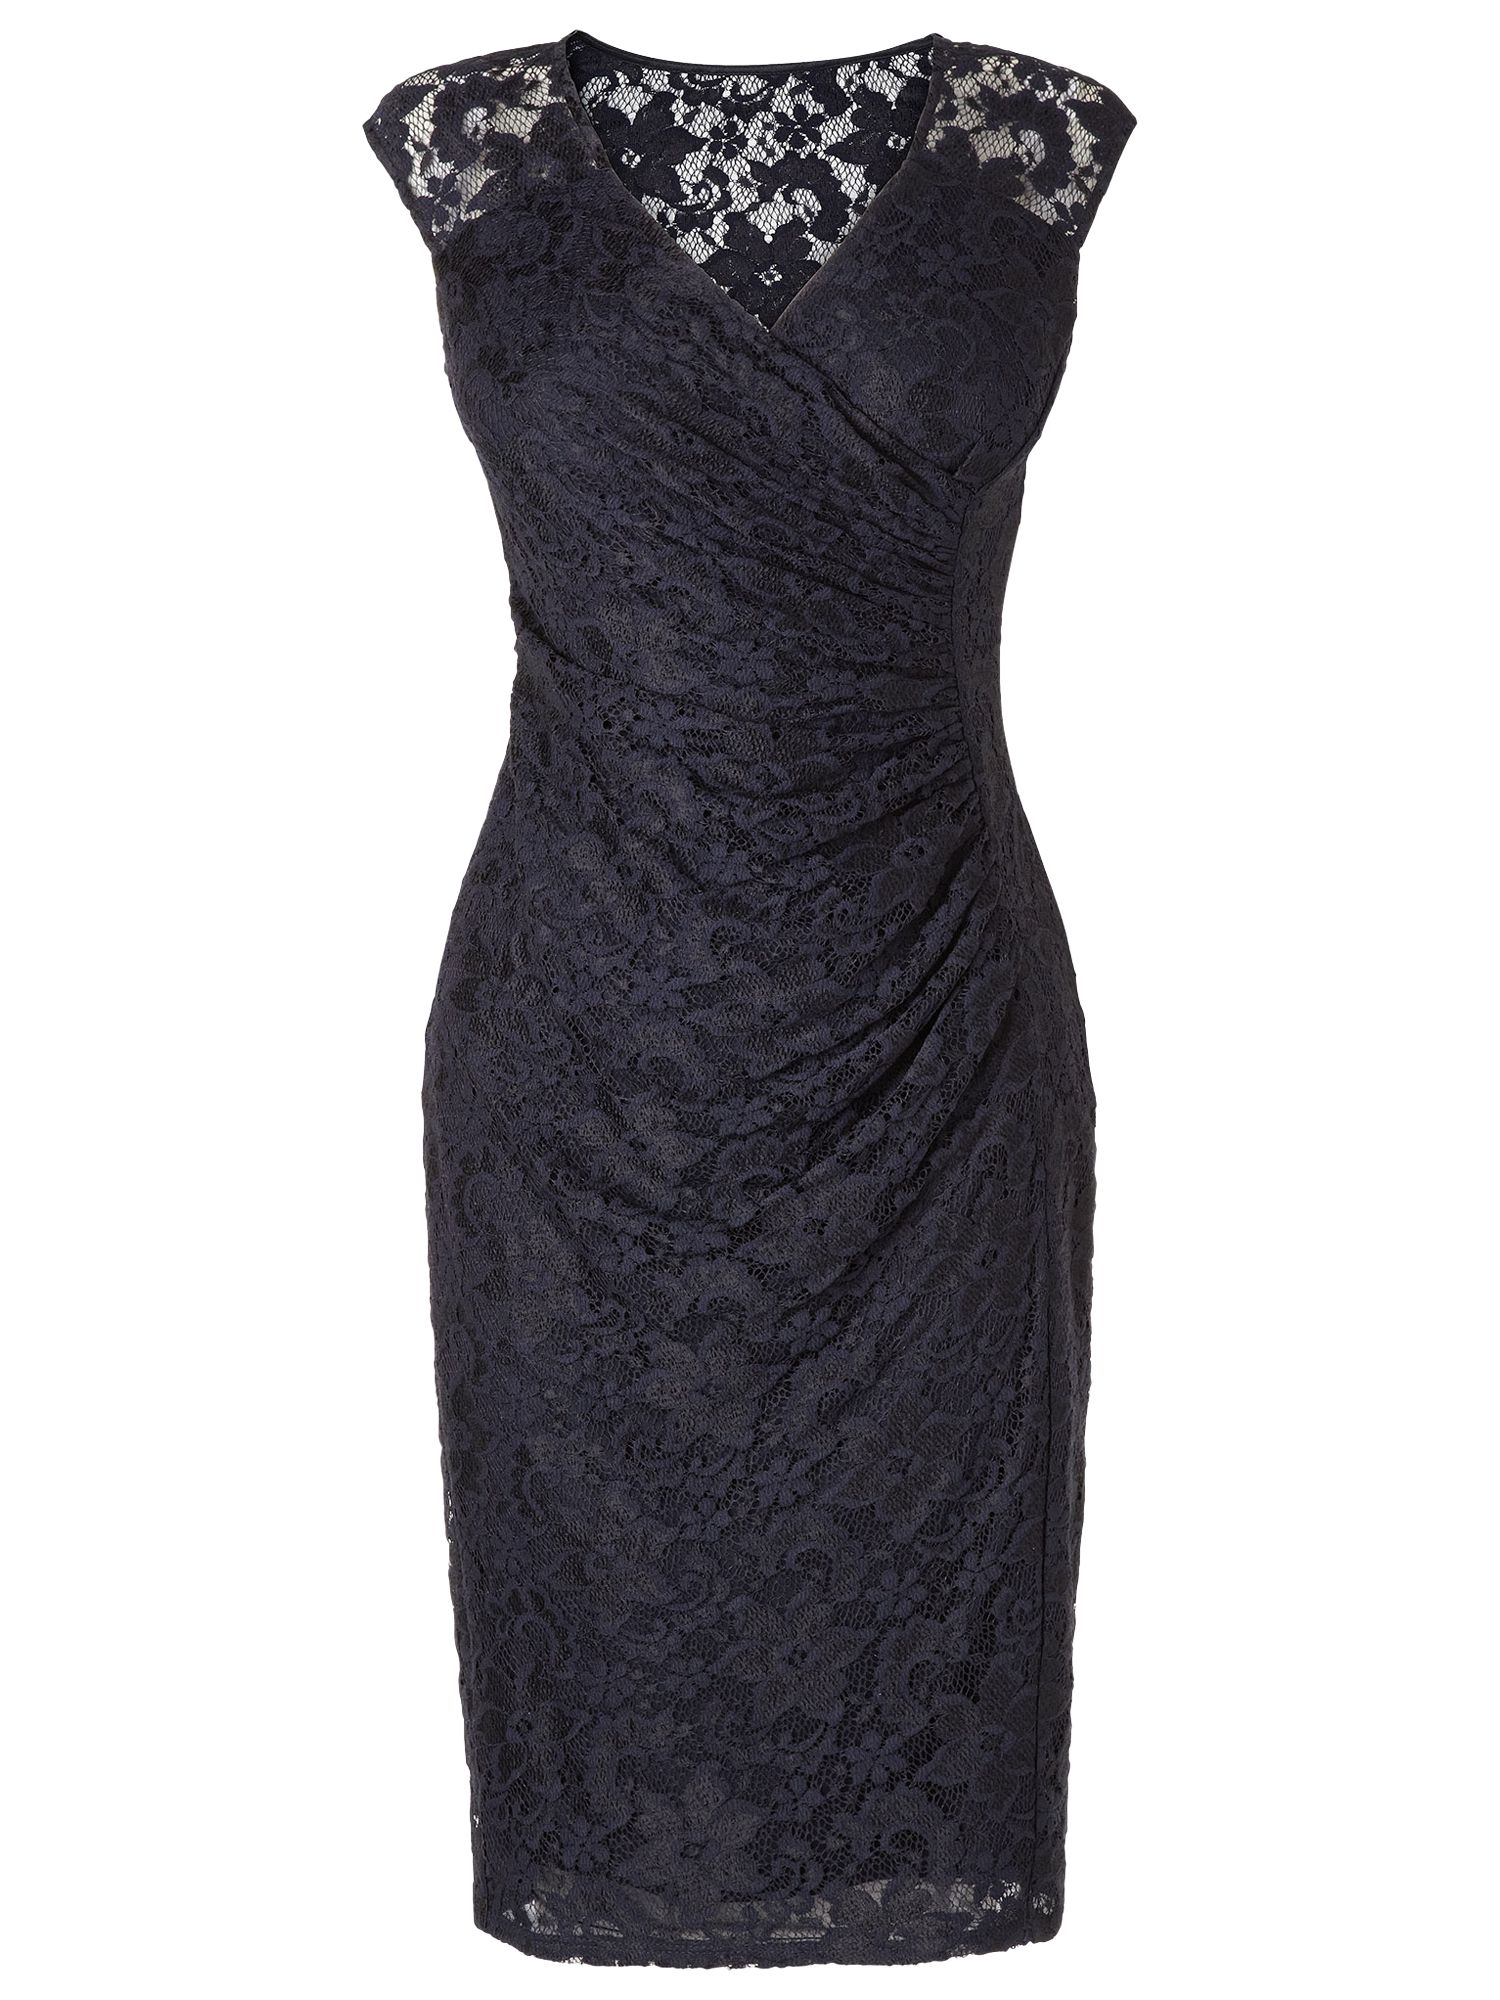 Buy Phase Eight Alyssa Lace Dress, Navy Online at johnlewis.com